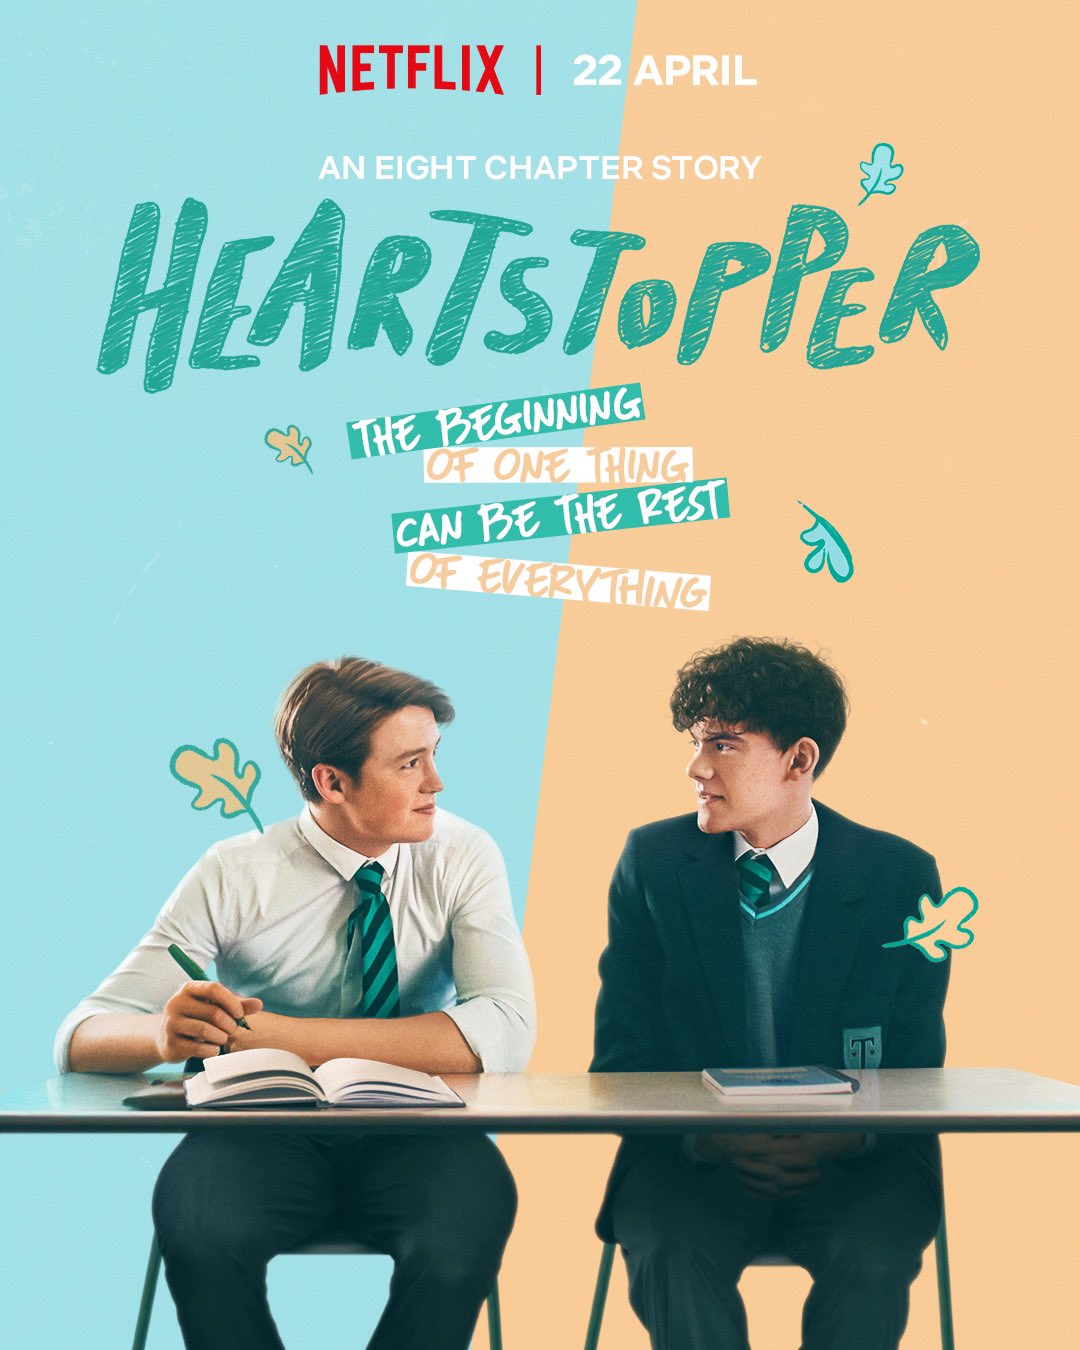 A New Show to Add to Your My Watch List: Heartstopper